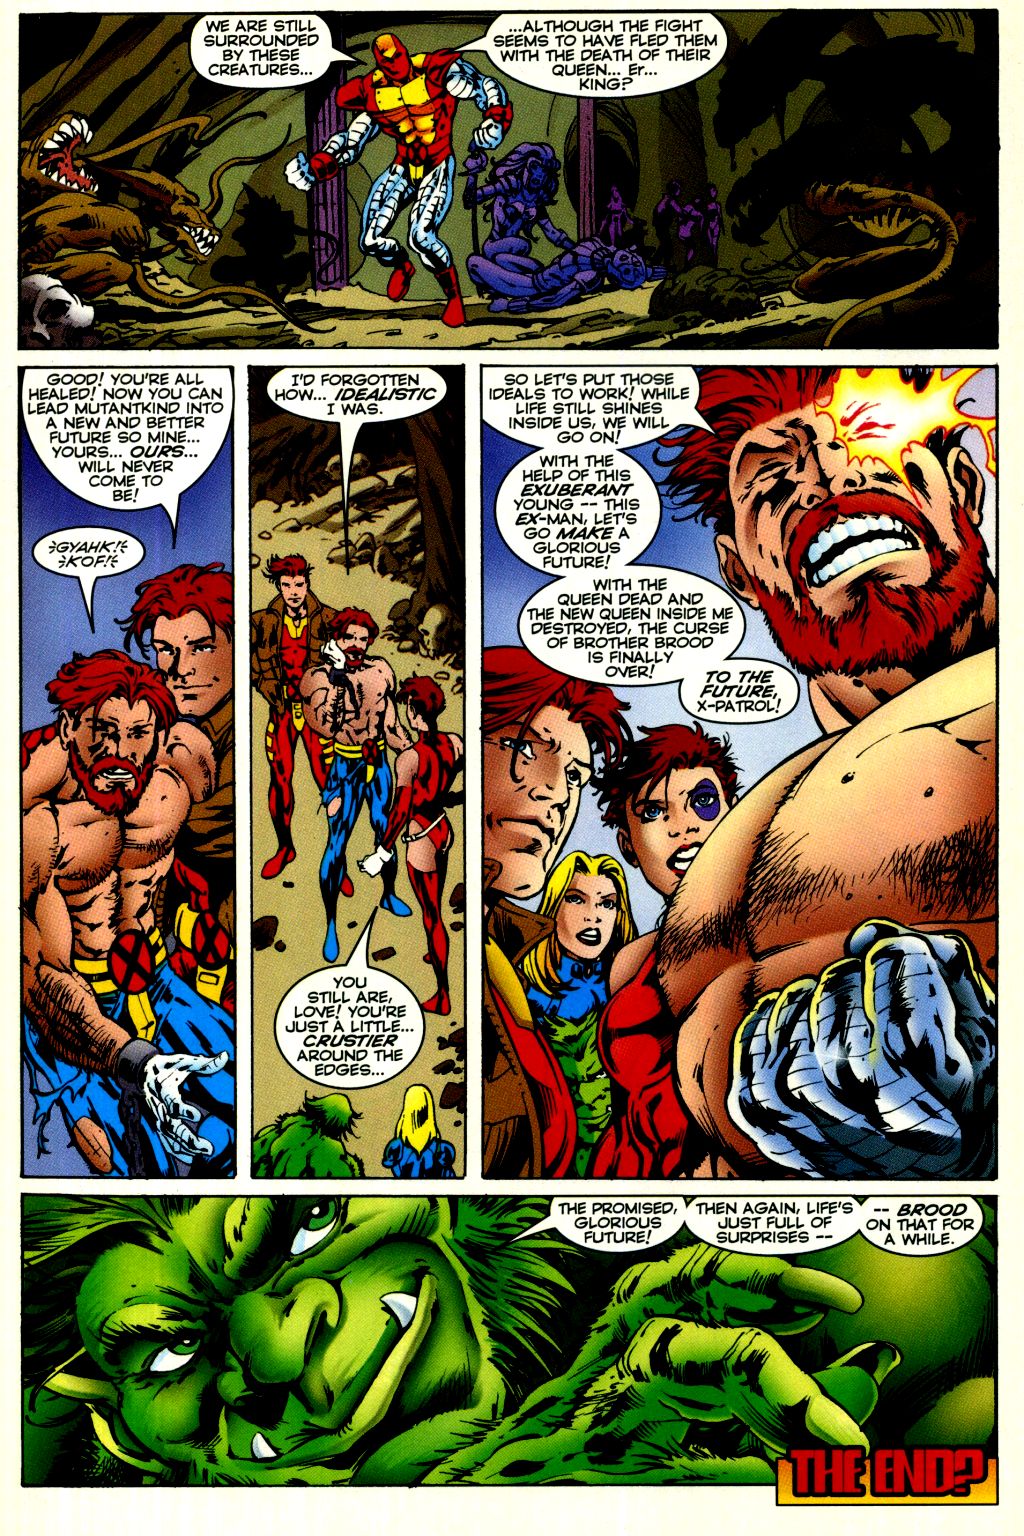 Read online Exciting X-Patrol comic -  Issue # Full - 22